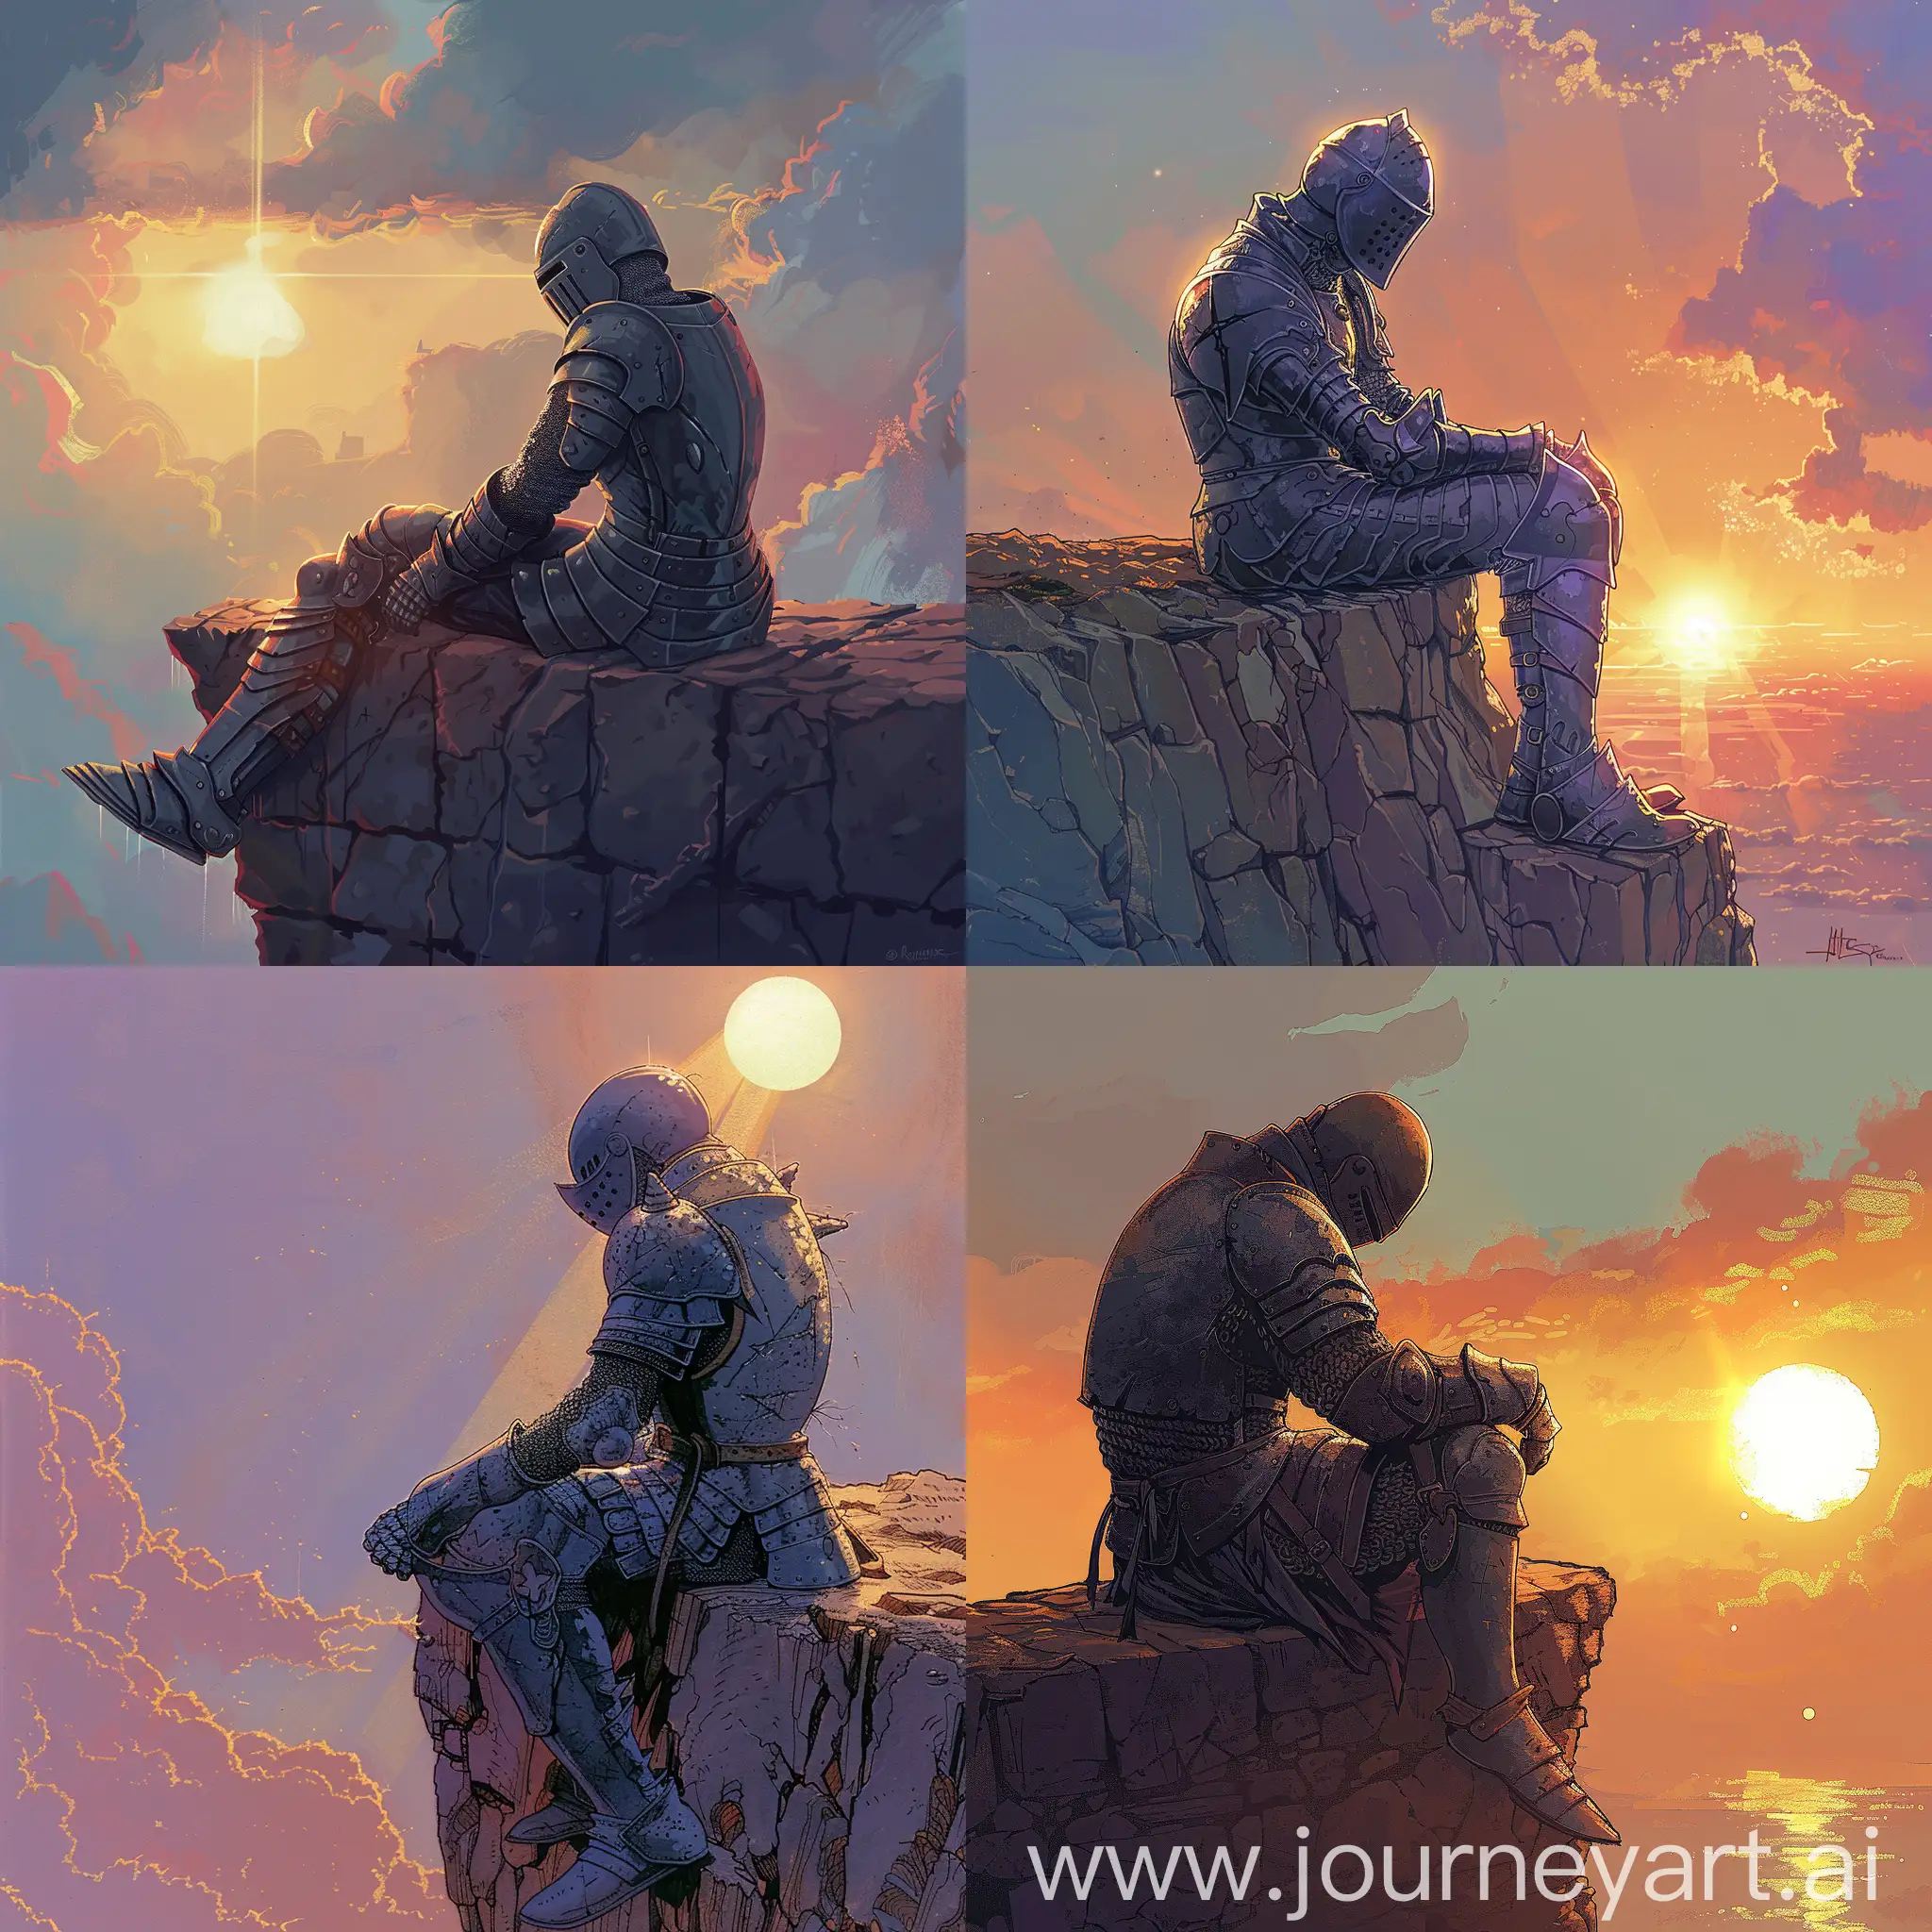 An illustration of a knight wearing armor of the black knight from the Monty Python's Holy Grail sitting on the edge of a cliff with a saddened posture looking at the sunrise, sunlight reflecting and highlitning on his armor. 80's fantasy art style.